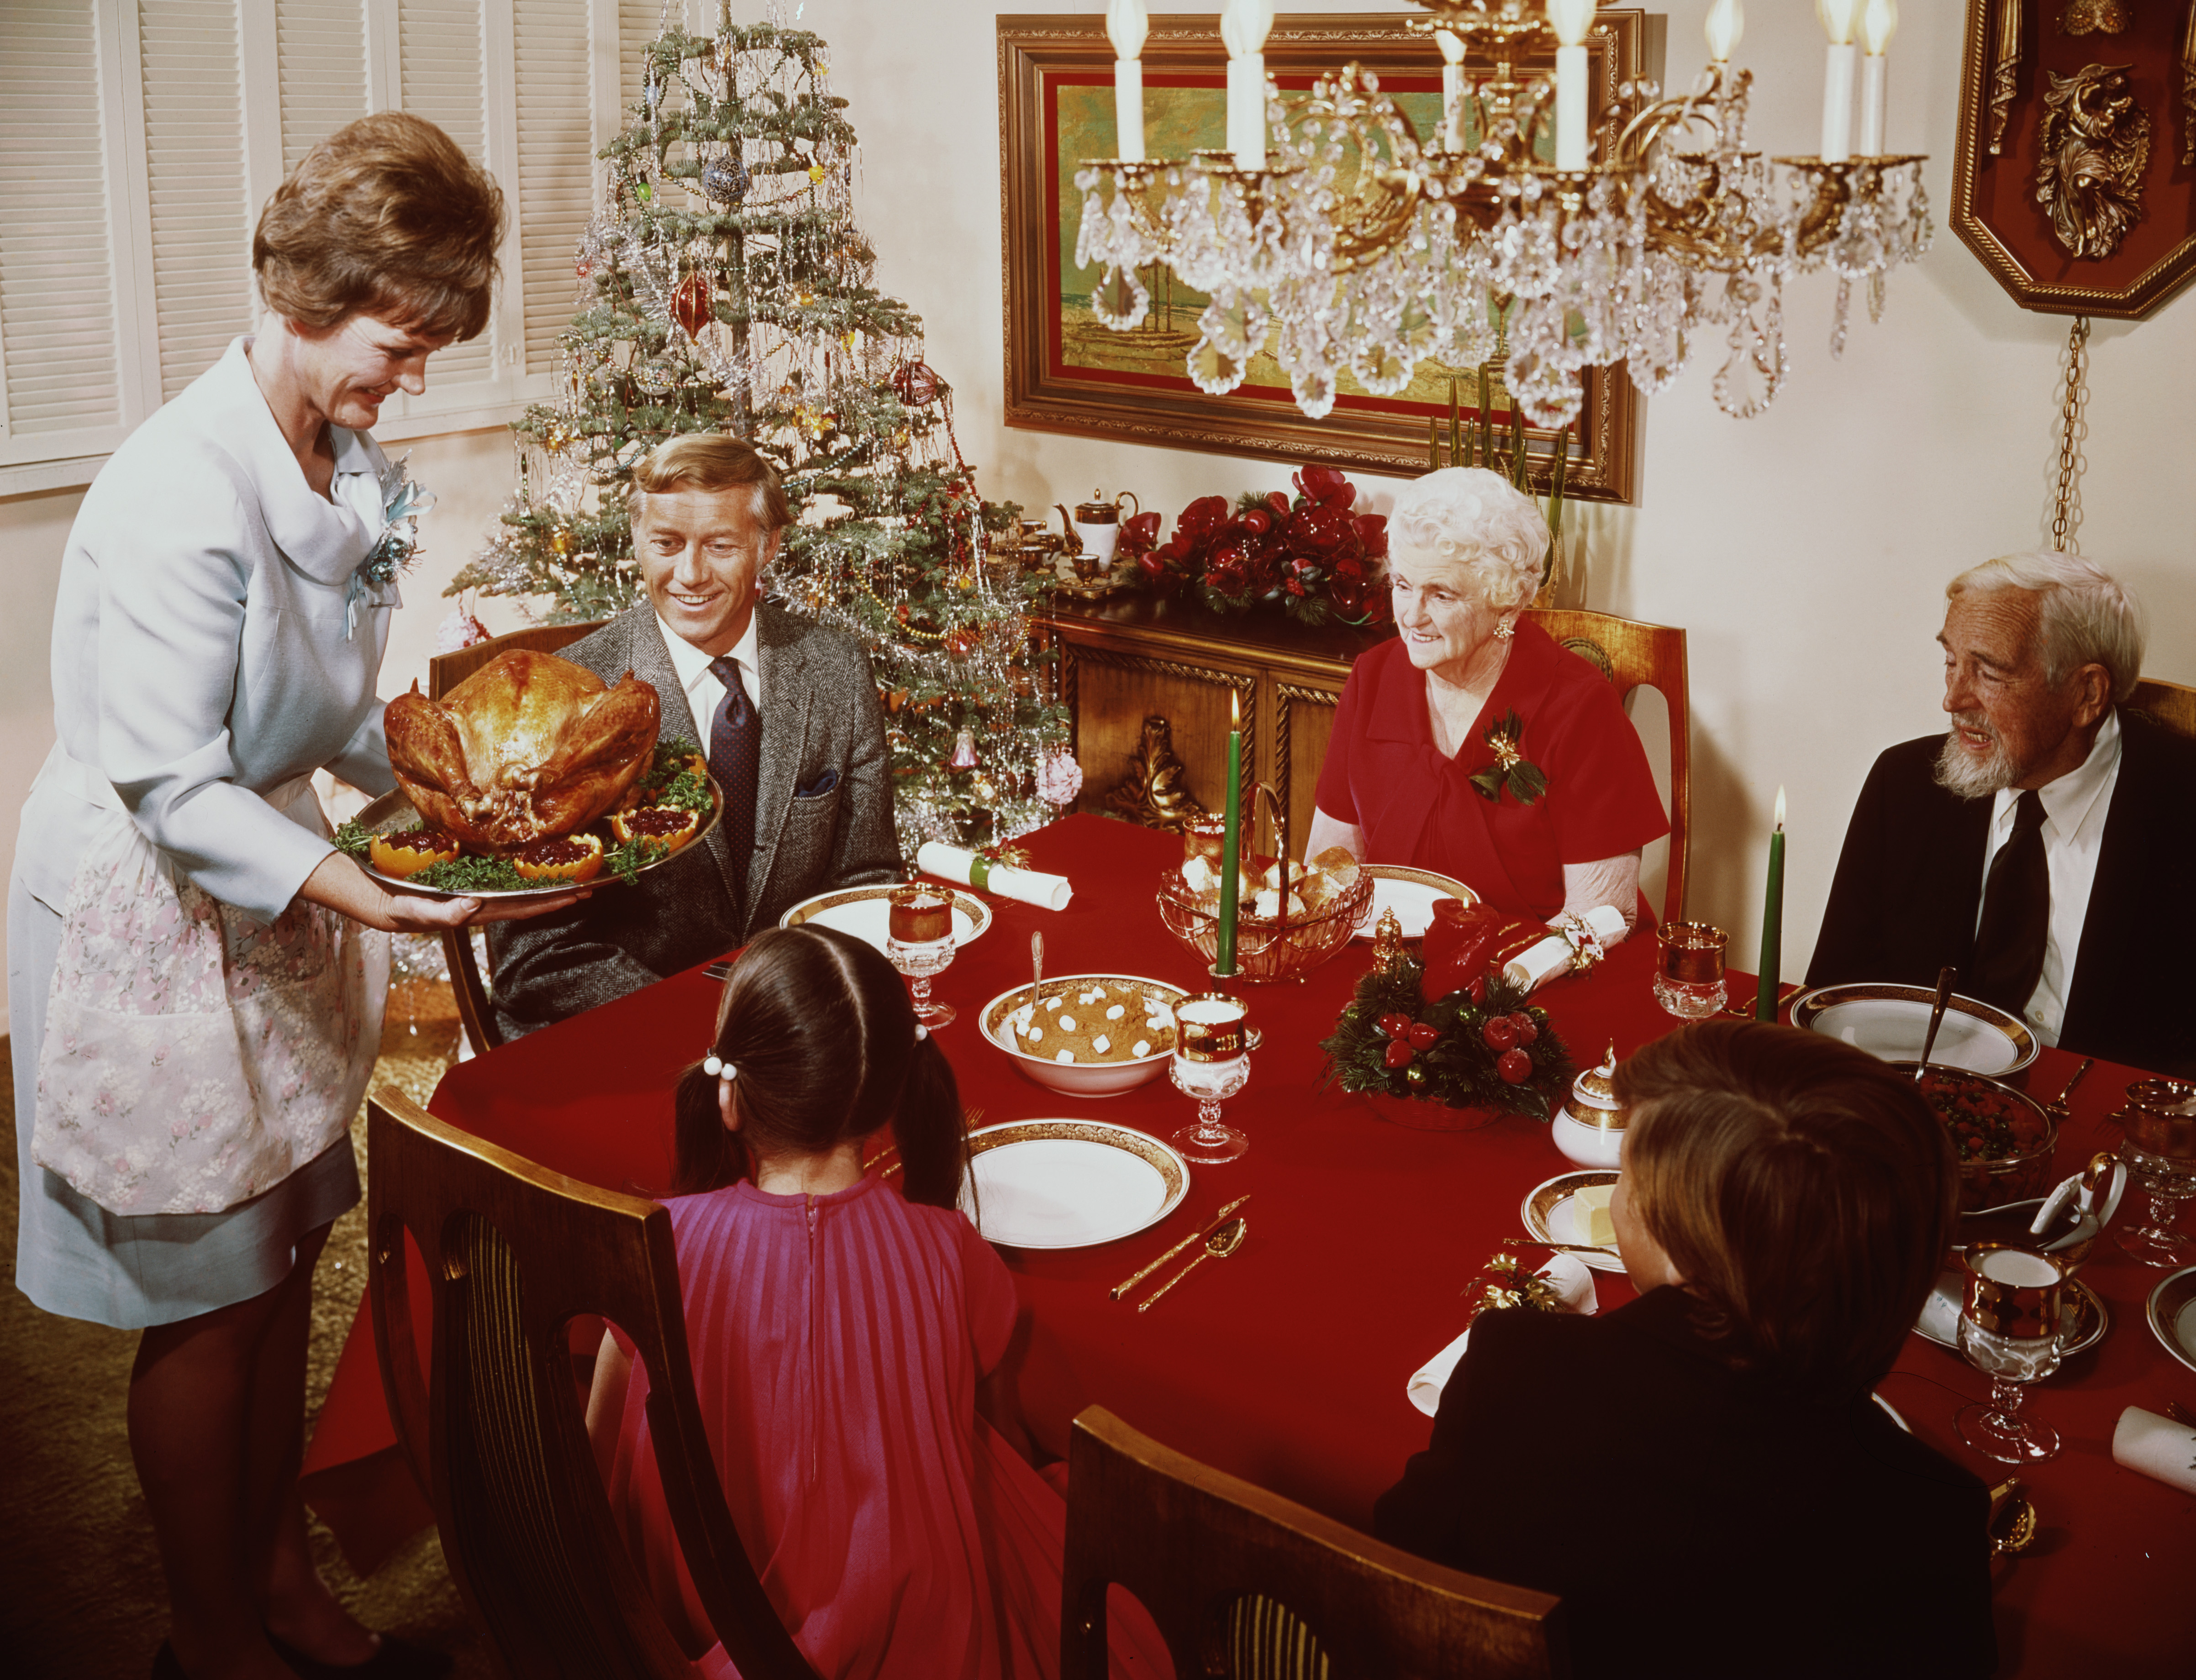 A mother bringing a large turkey to the table for Christmas dinner, circa 1965. (Photo by L. Willinger/FPG/Hulton Archive/Getty Images)